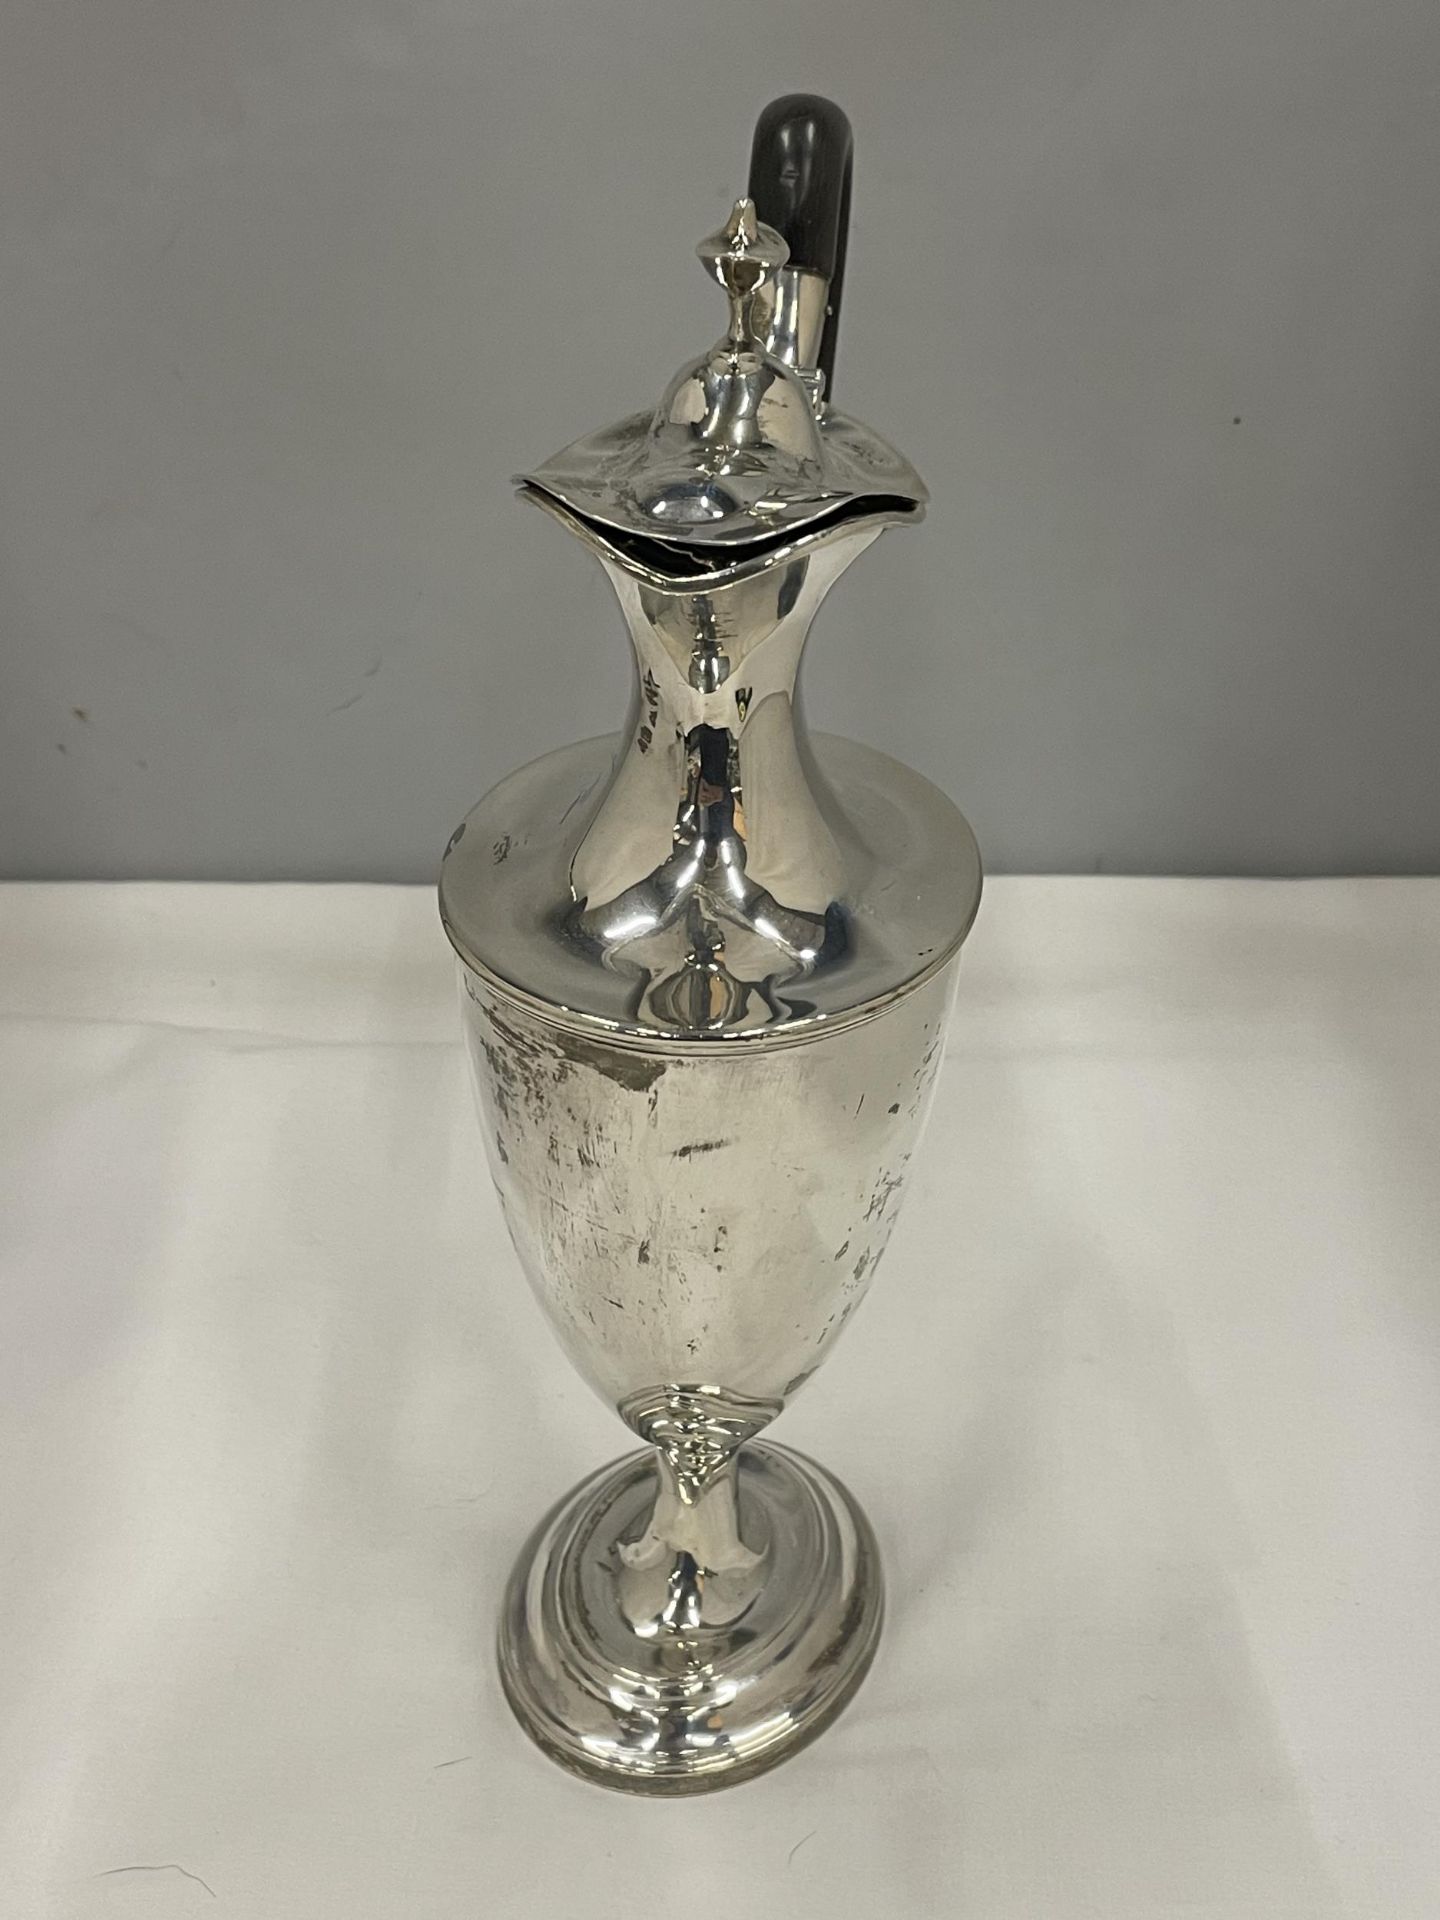 A WALKER AND HALL HALLMARKED SHEFFIELD SILVER CLARET JUG 26CM HIGH GROSS WEIGHT 515 GRAMS - Image 2 of 5